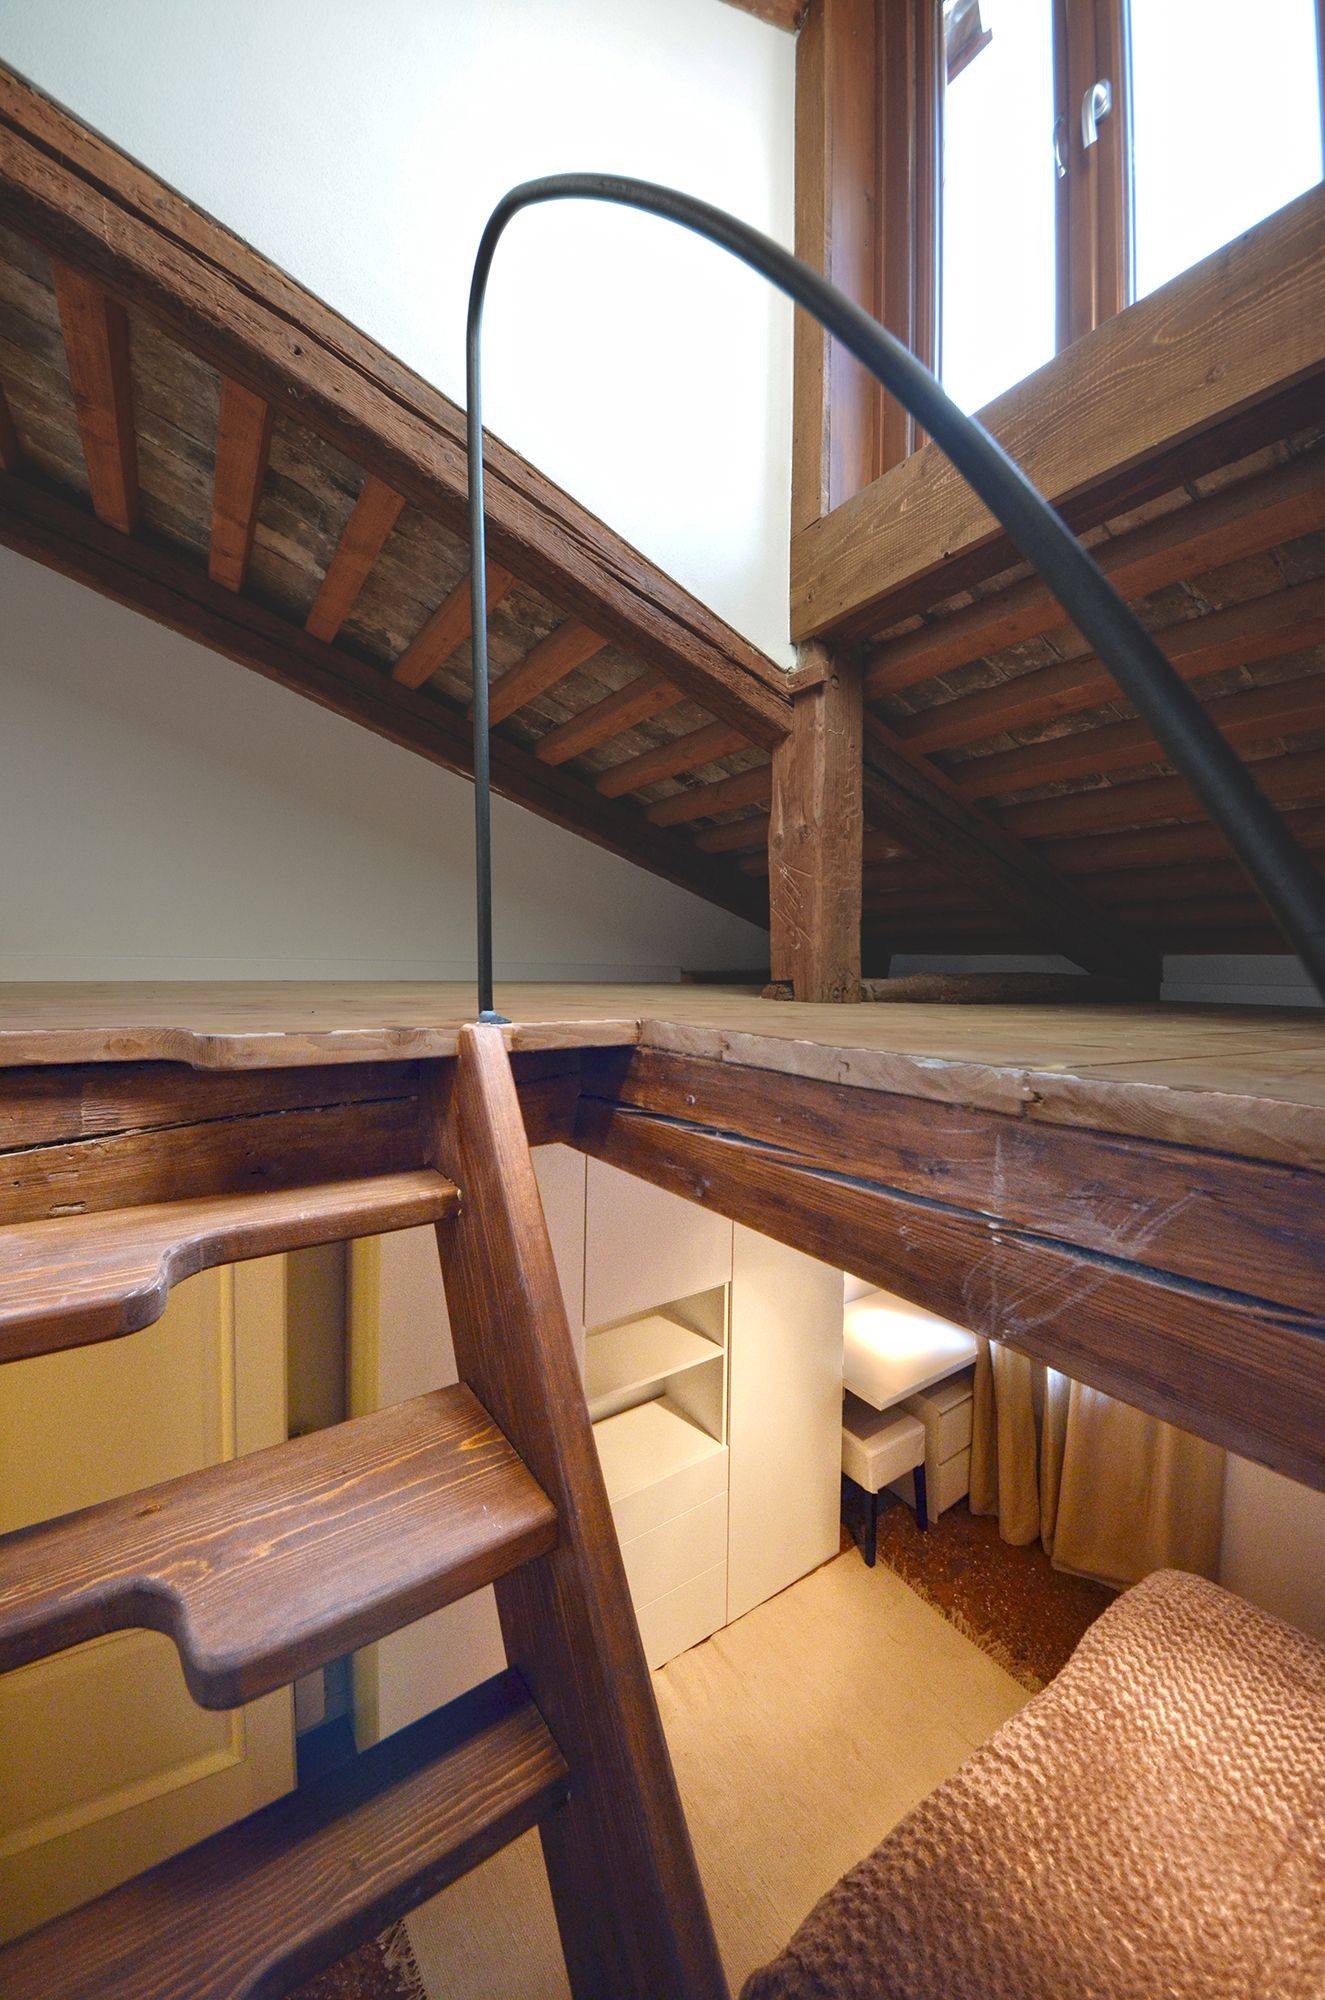 the attic is used as storage room